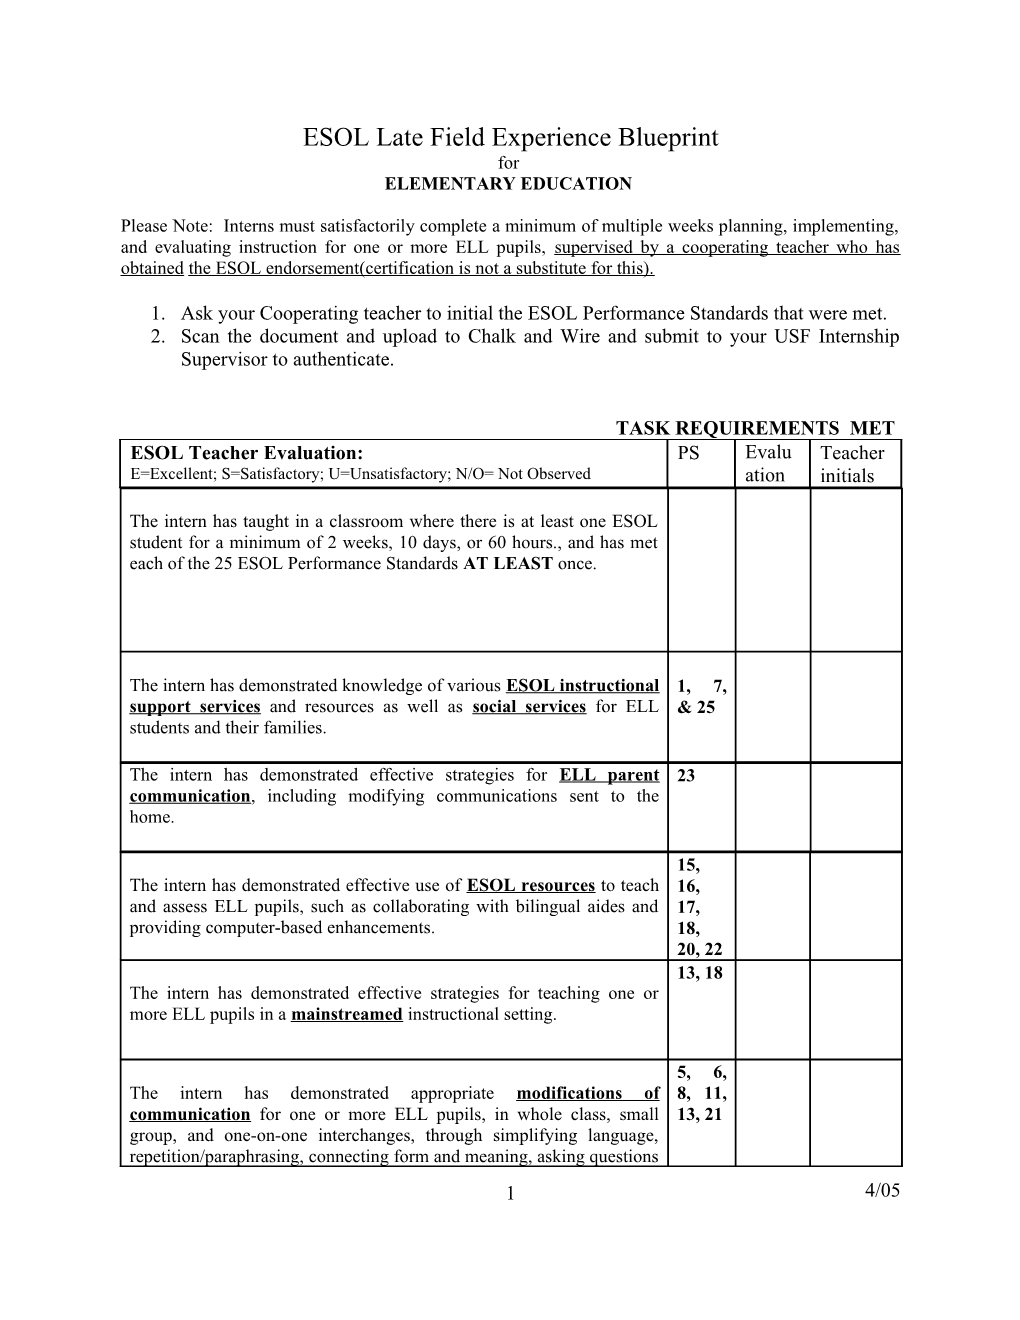 ESOL Late Field Experience Evaluation Form